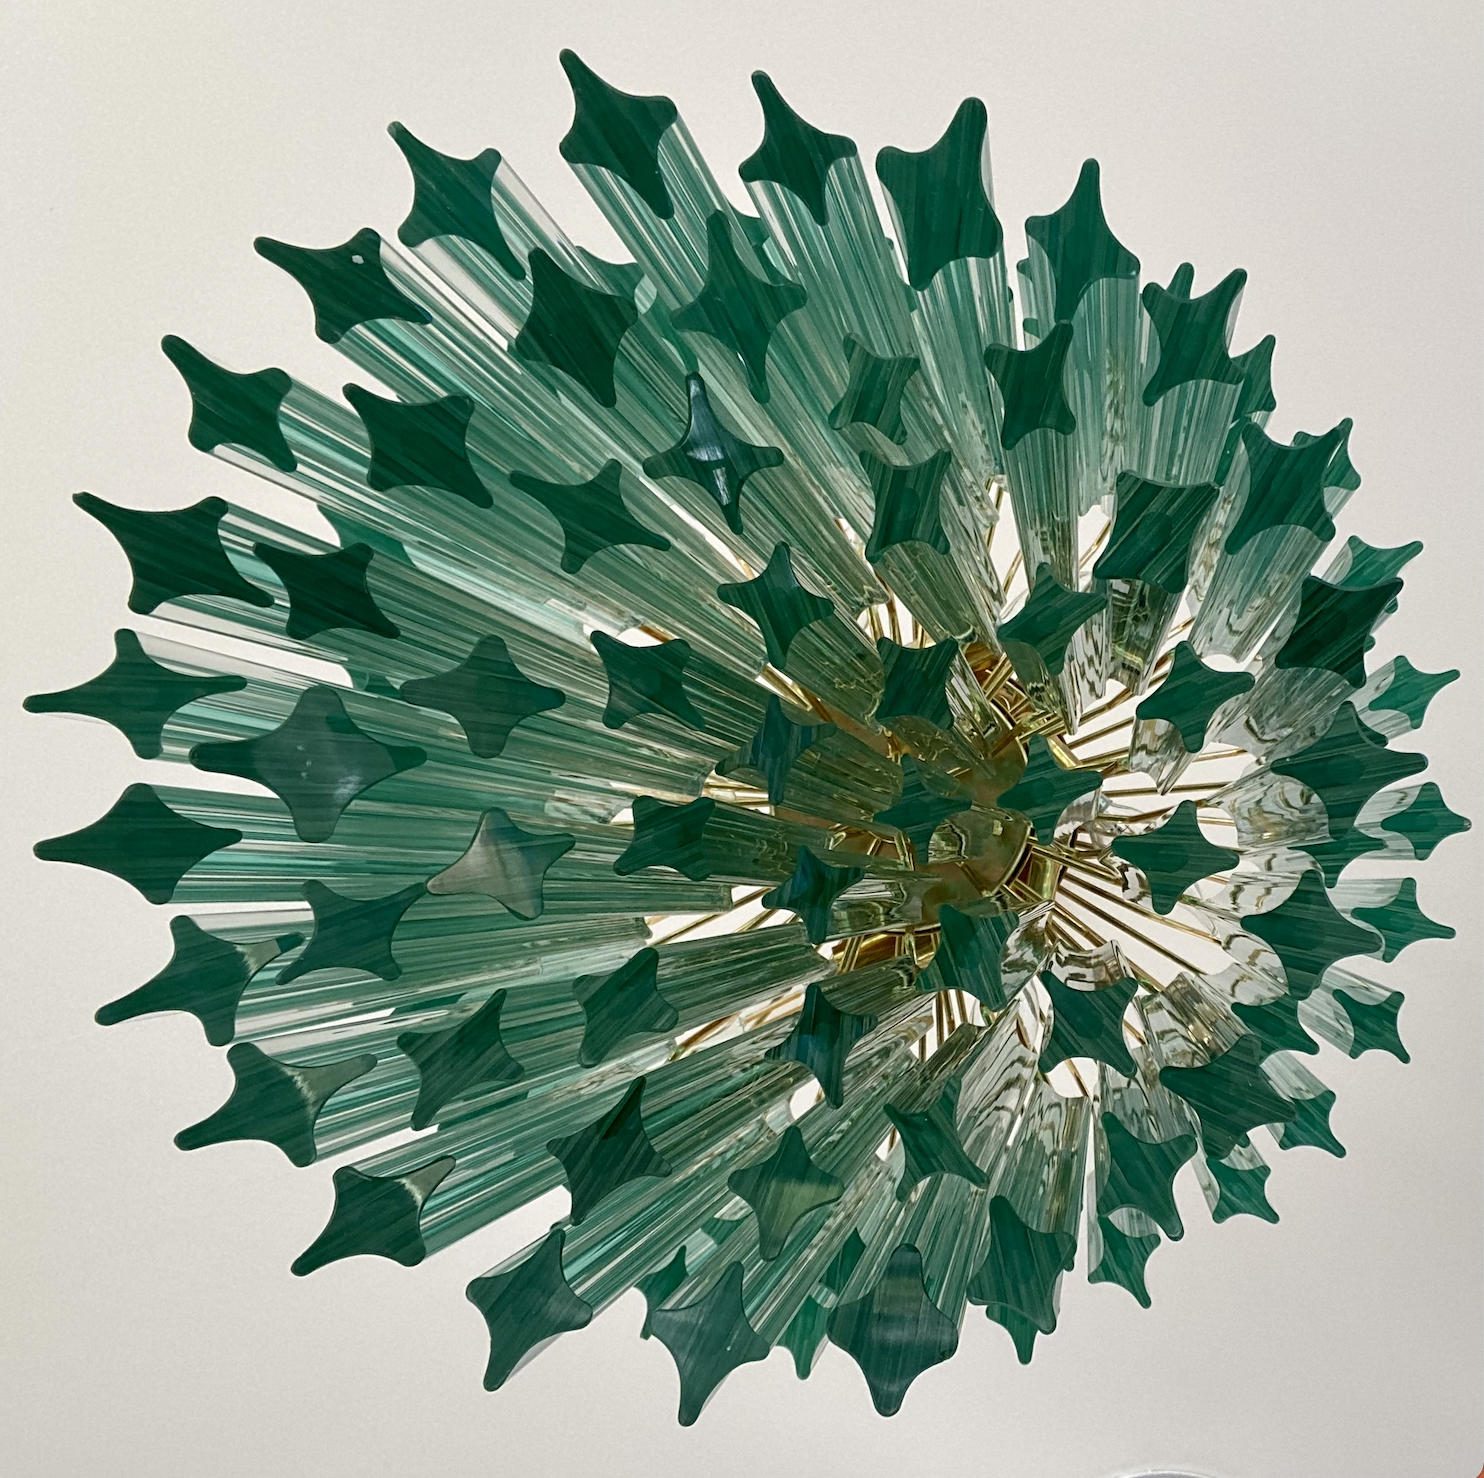 selected vintage Murano chandelier for West Marin residence